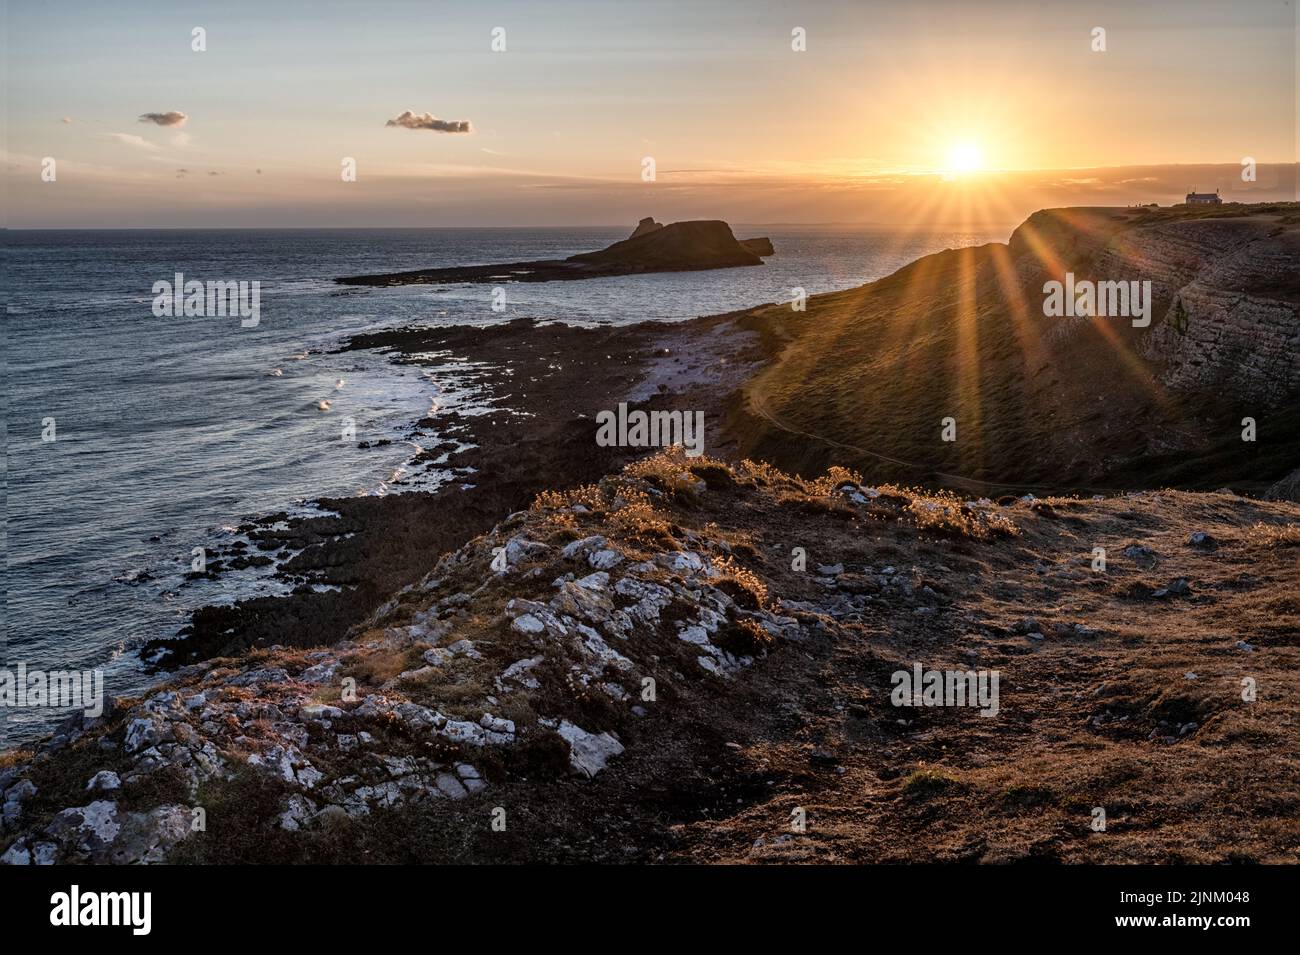 Worms Head, Rhossili, Gower Peninsula, South Wales Stock Photo